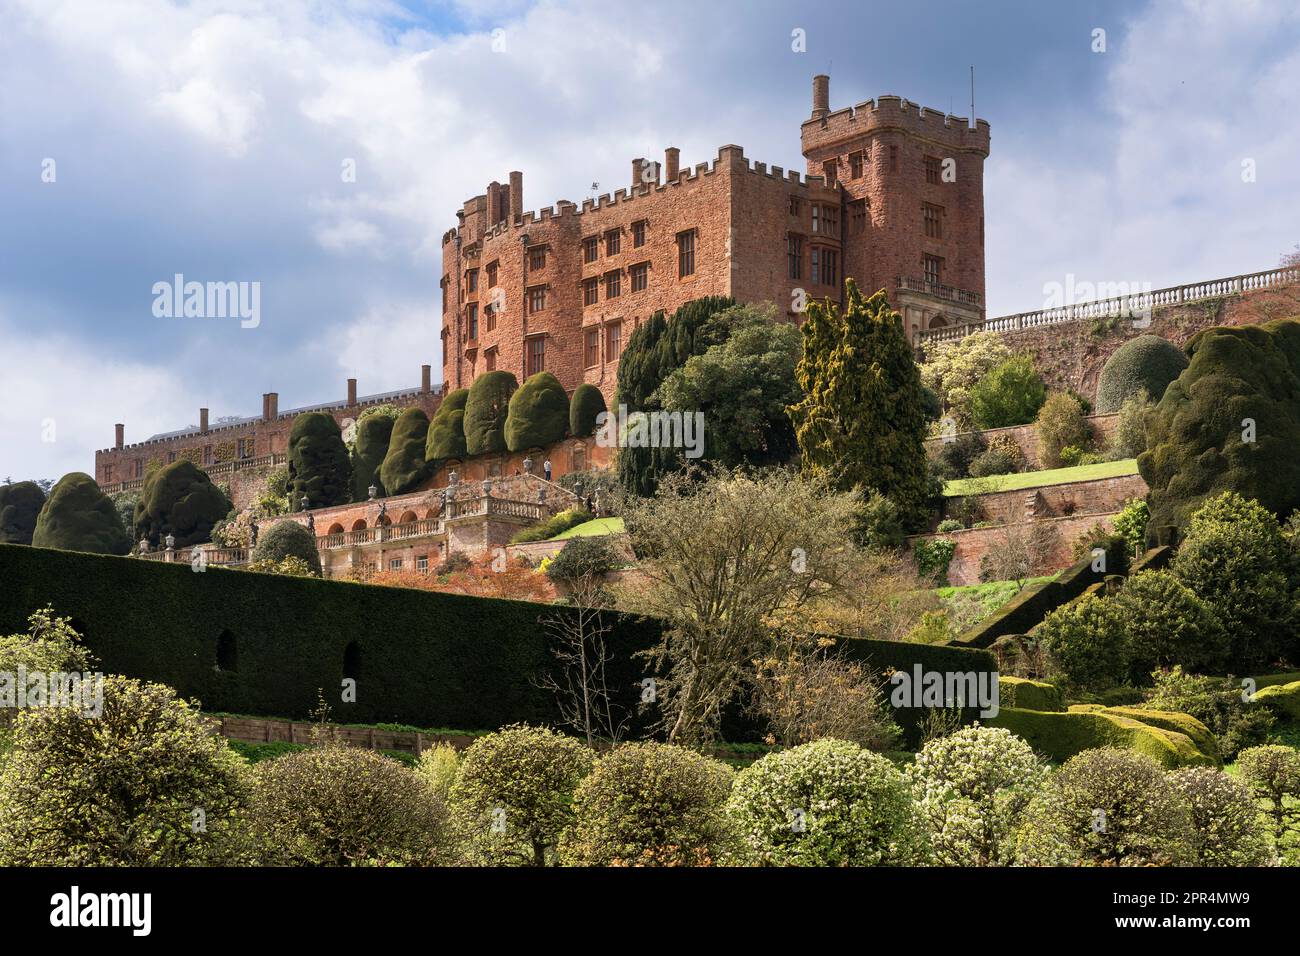 Powis Castle is a medieval fortress & grand country house with a Baroque garden, here with yew trees and apples trees in blossom. Powys, Wales Stock Photo